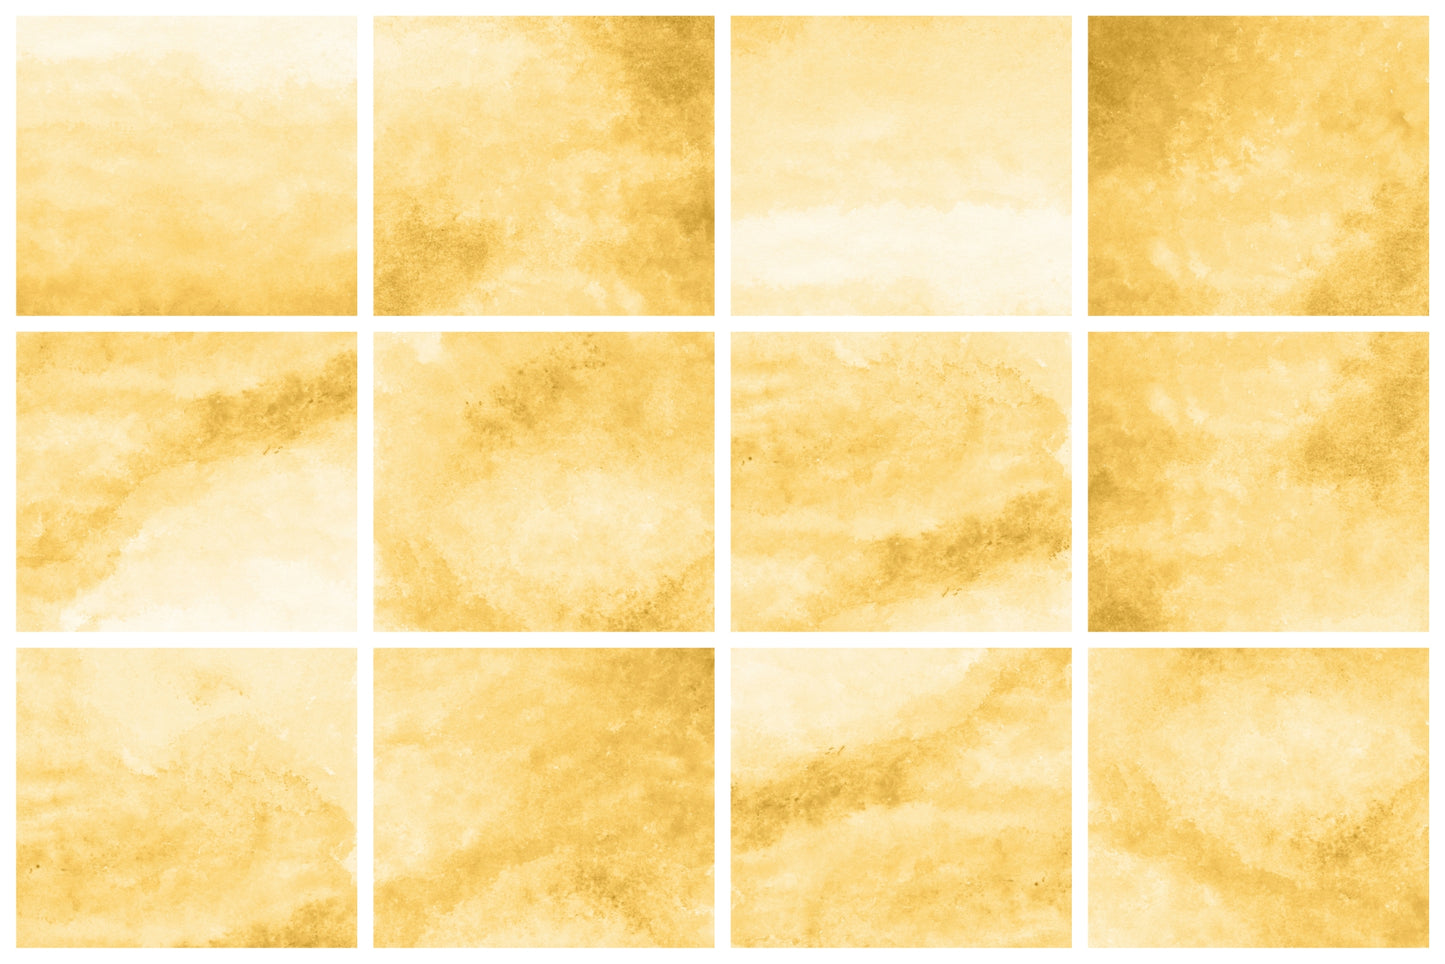 Watercolor Texture Backgrounds 01 Yellow Gold Watercolor Textures